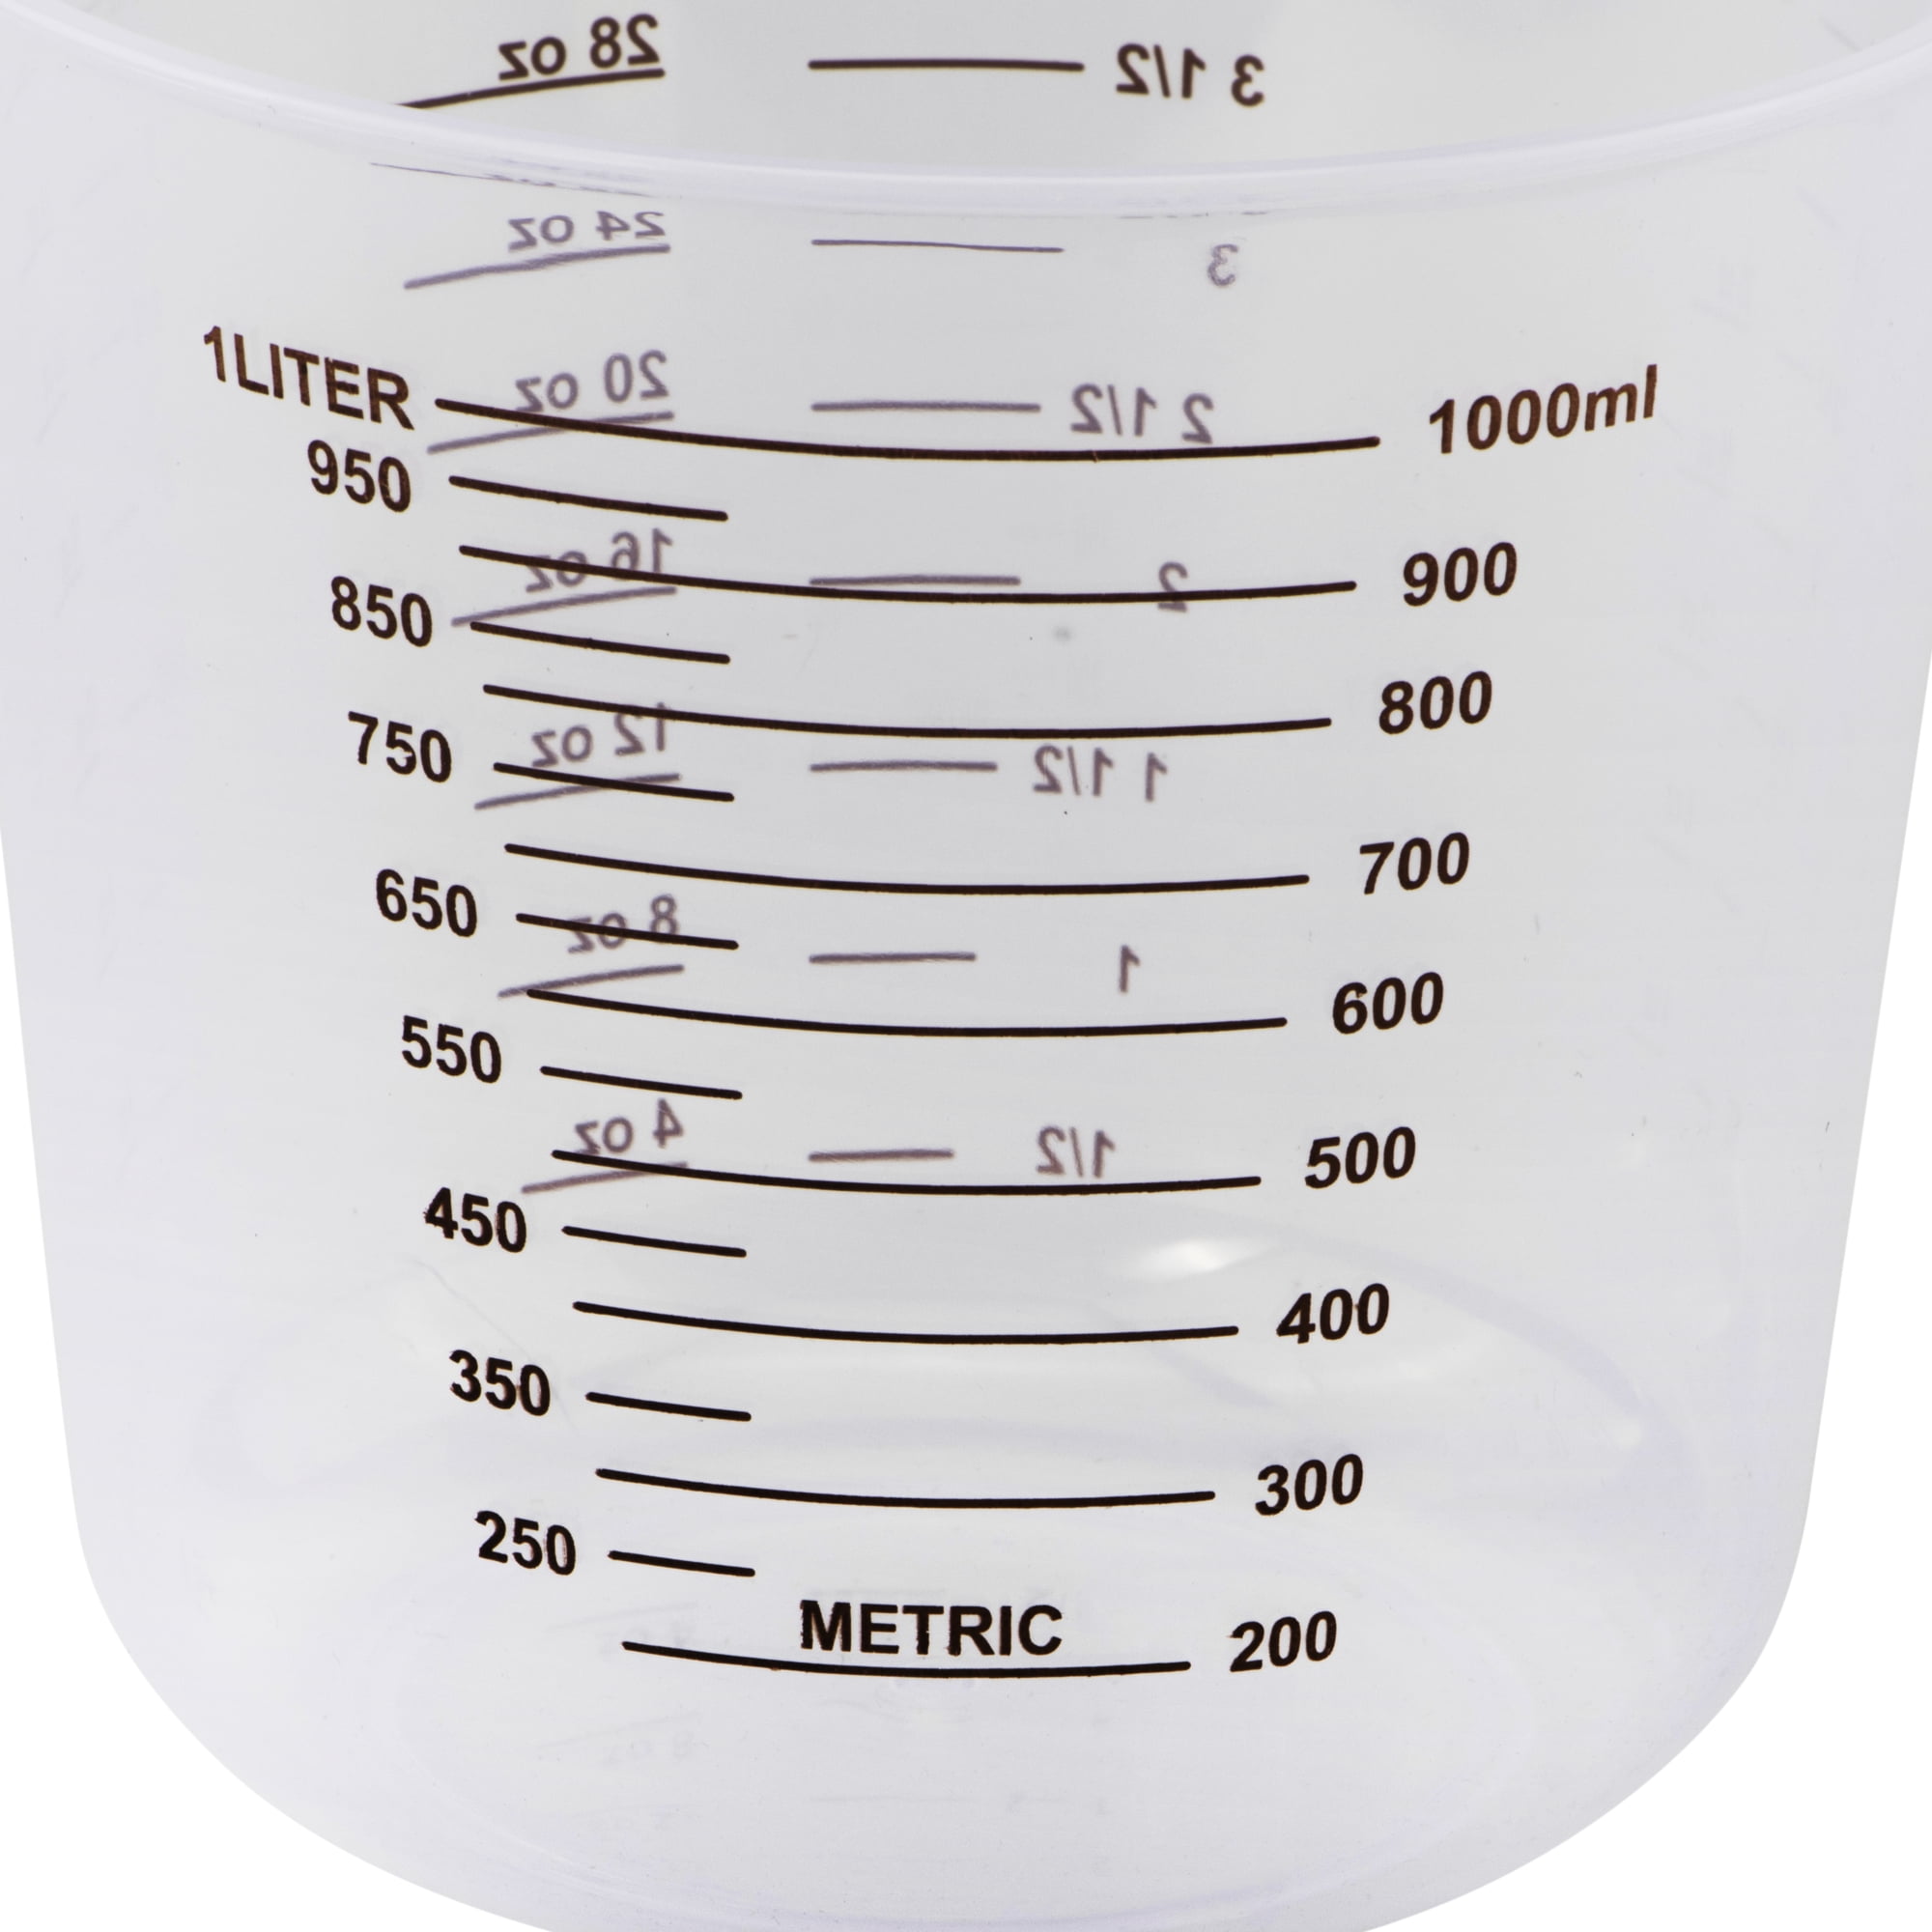 Greenbrier Plastic 4cup Measuring Cup